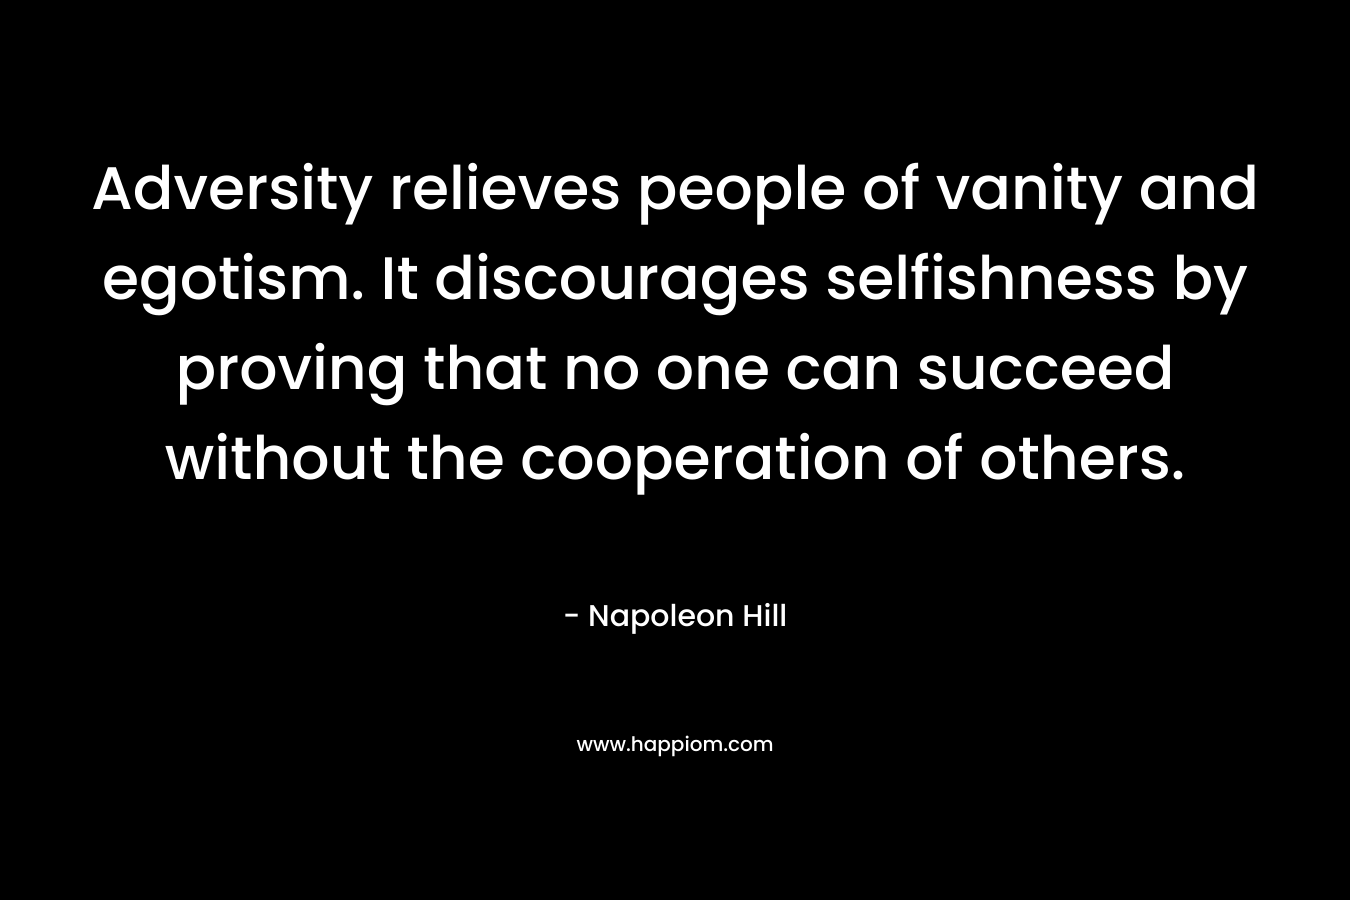 Adversity relieves people of vanity and egotism. It discourages selfishness by proving that no one can succeed without the cooperation of others. – Napoleon Hill